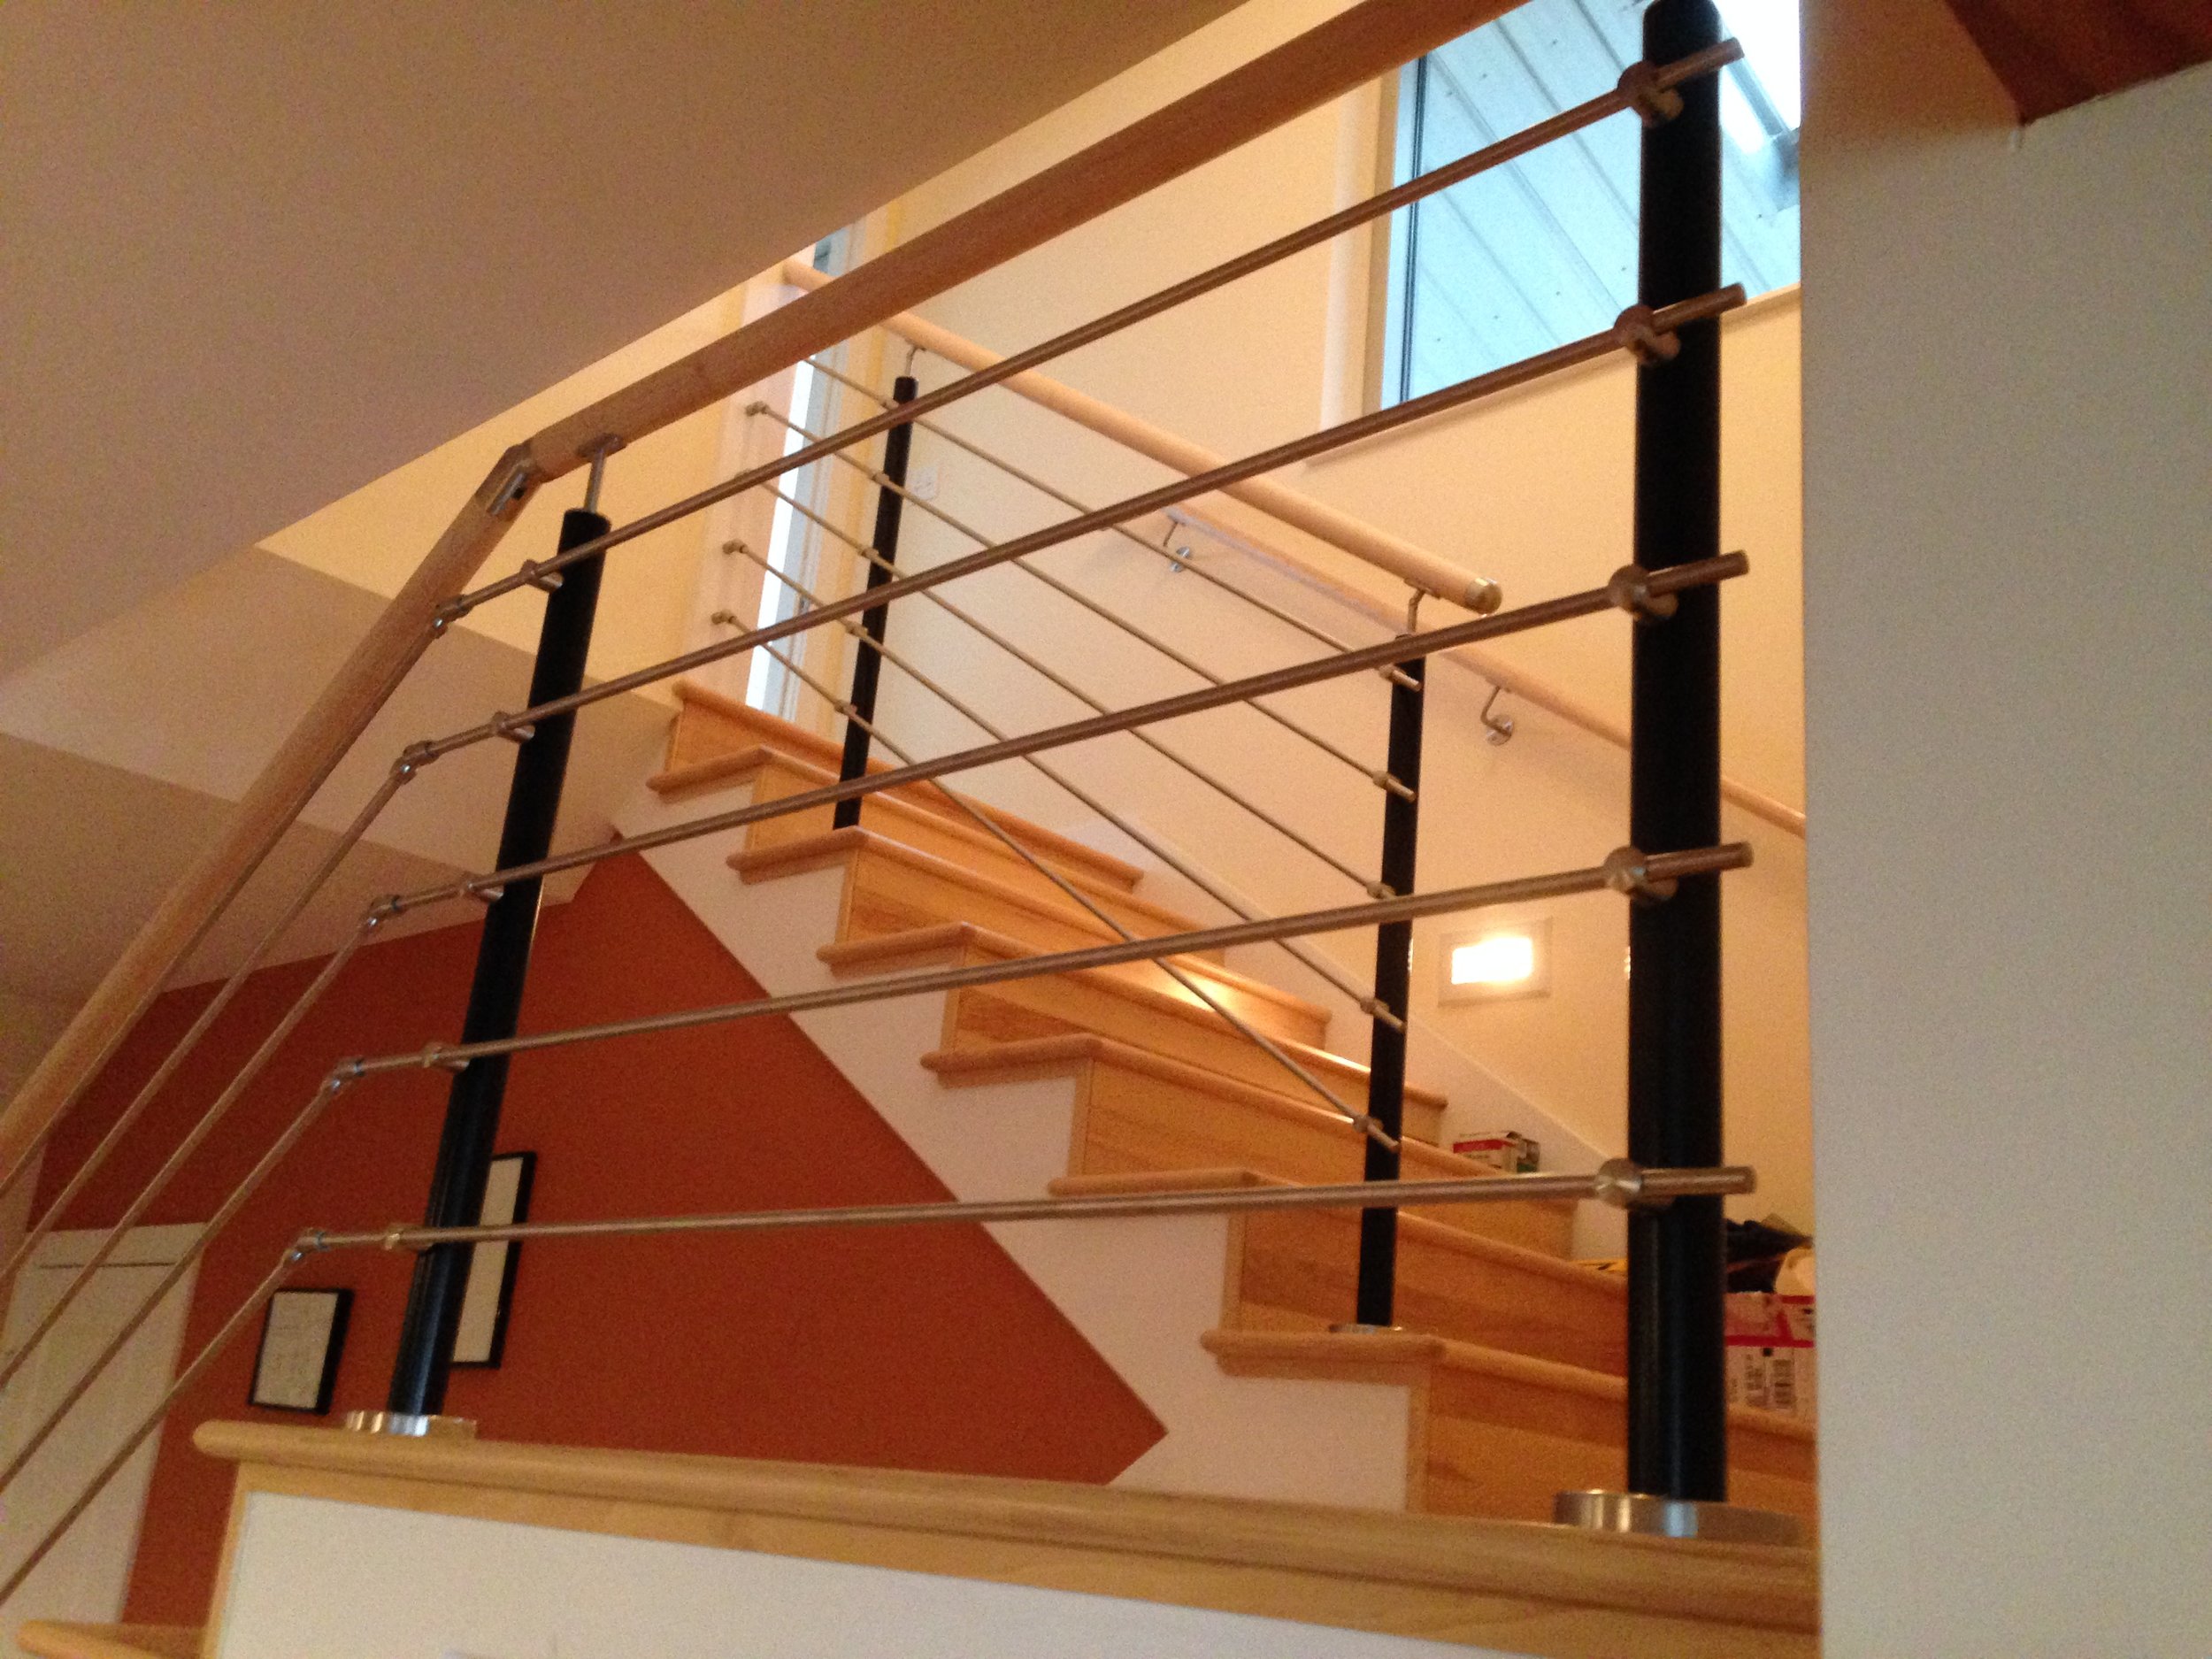 Stair with stainless railings